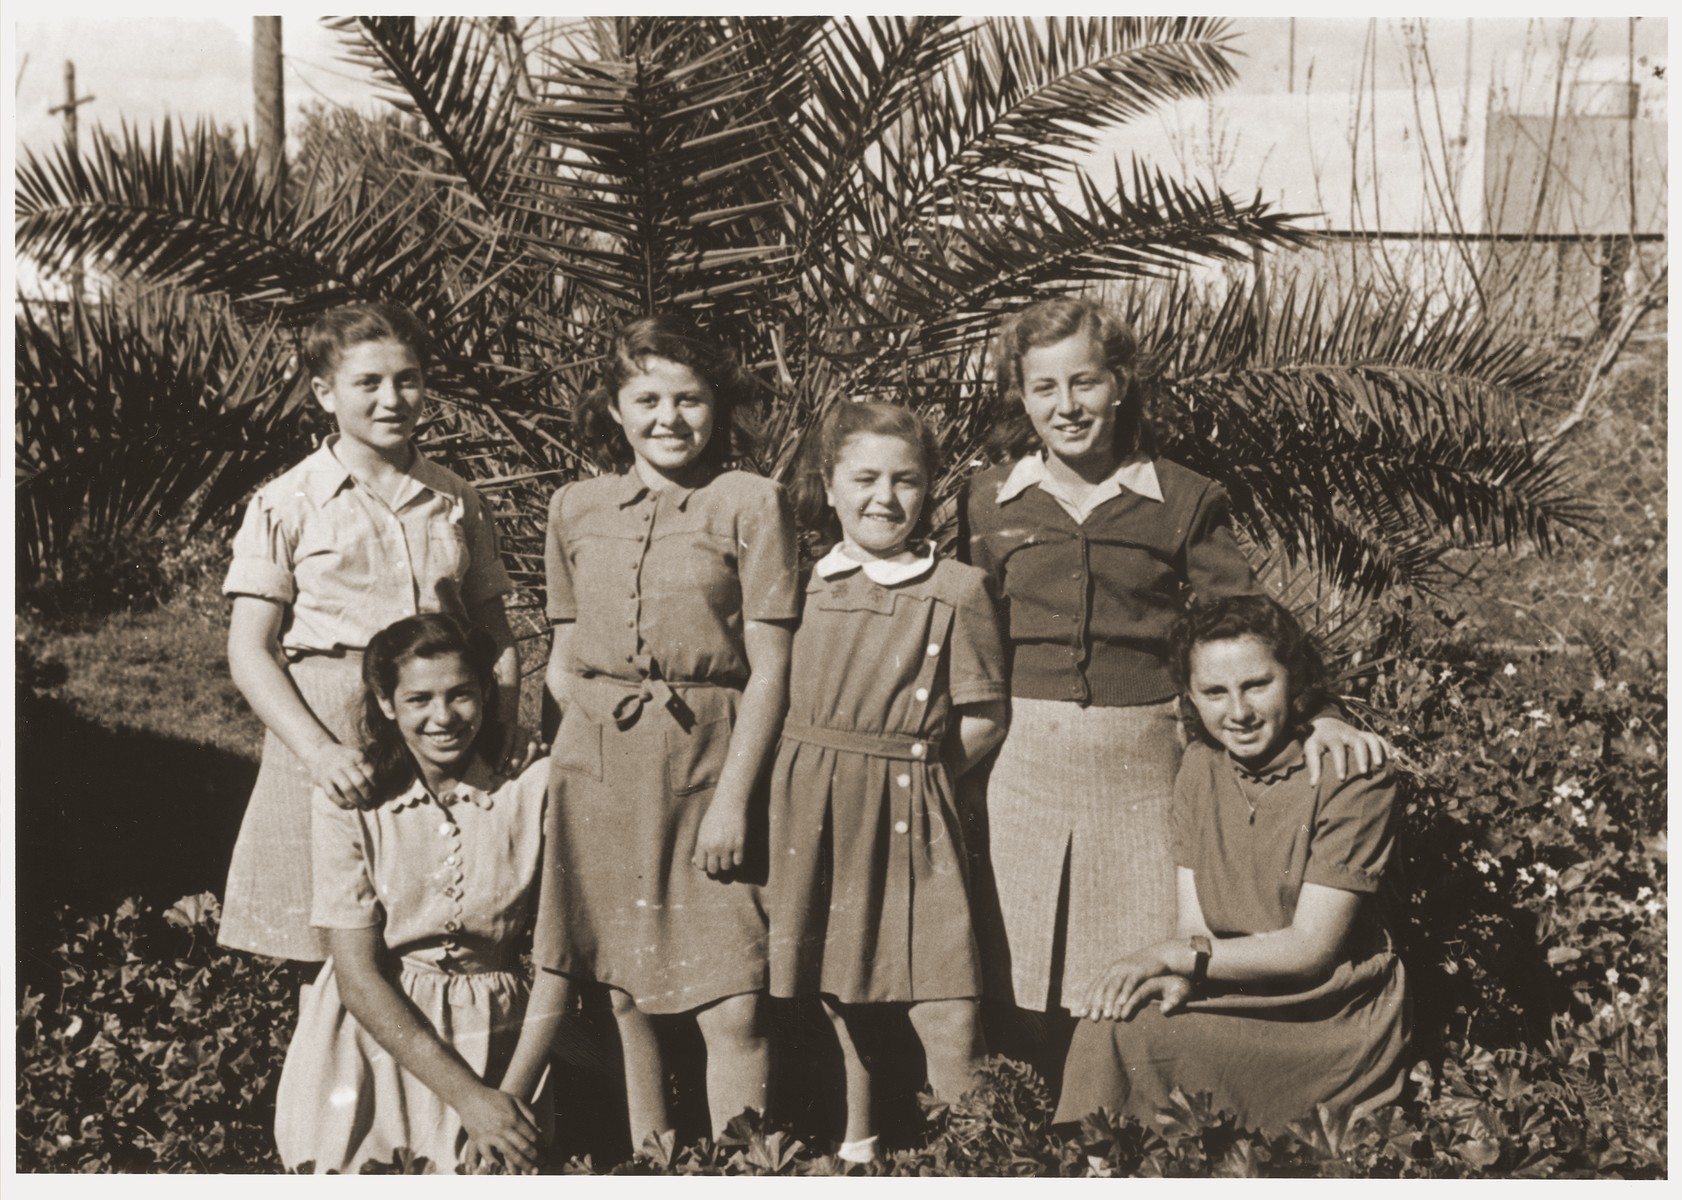 Group portrait of former Transnistria orphans, now settled in Palestine due in part to the efforts of Anny Andermann.

The inscription on the back of the photo reads: "A souvenir; the time passes quickly, the days follow each other, we write to you a souvenir because we don't know how long we will live, and as a sign of our love for you.  Anutza, Dora, Shana, Sarina, Gisella.  May God repay you, dear and good Mrs. Andermann."